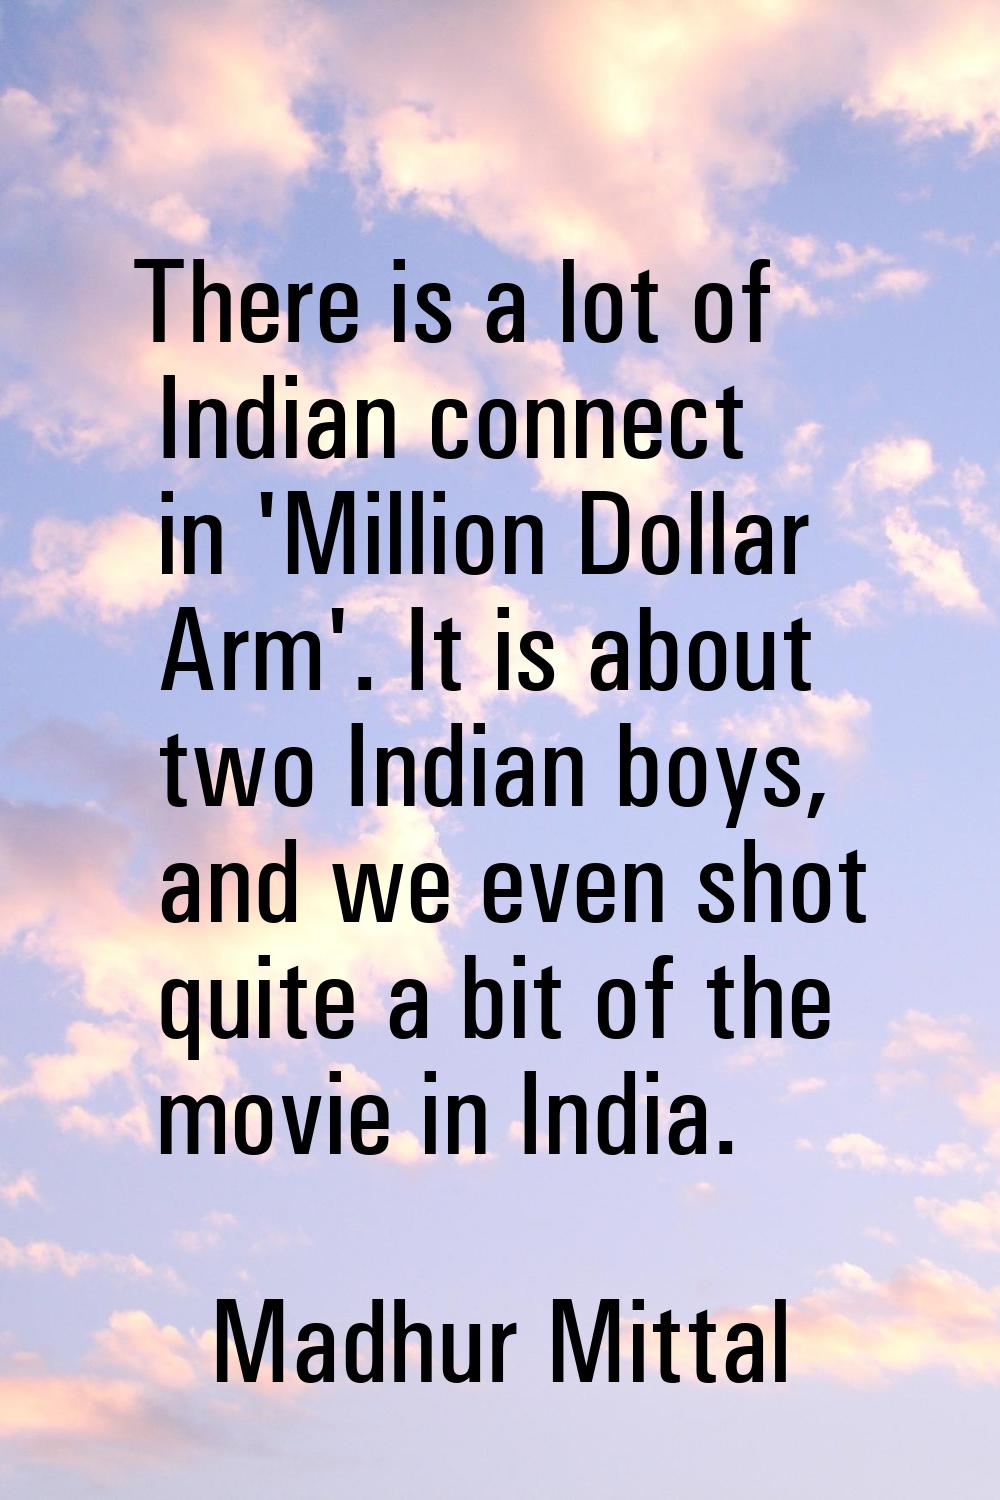 There is a lot of Indian connect in 'Million Dollar Arm'. It is about two Indian boys, and we even 